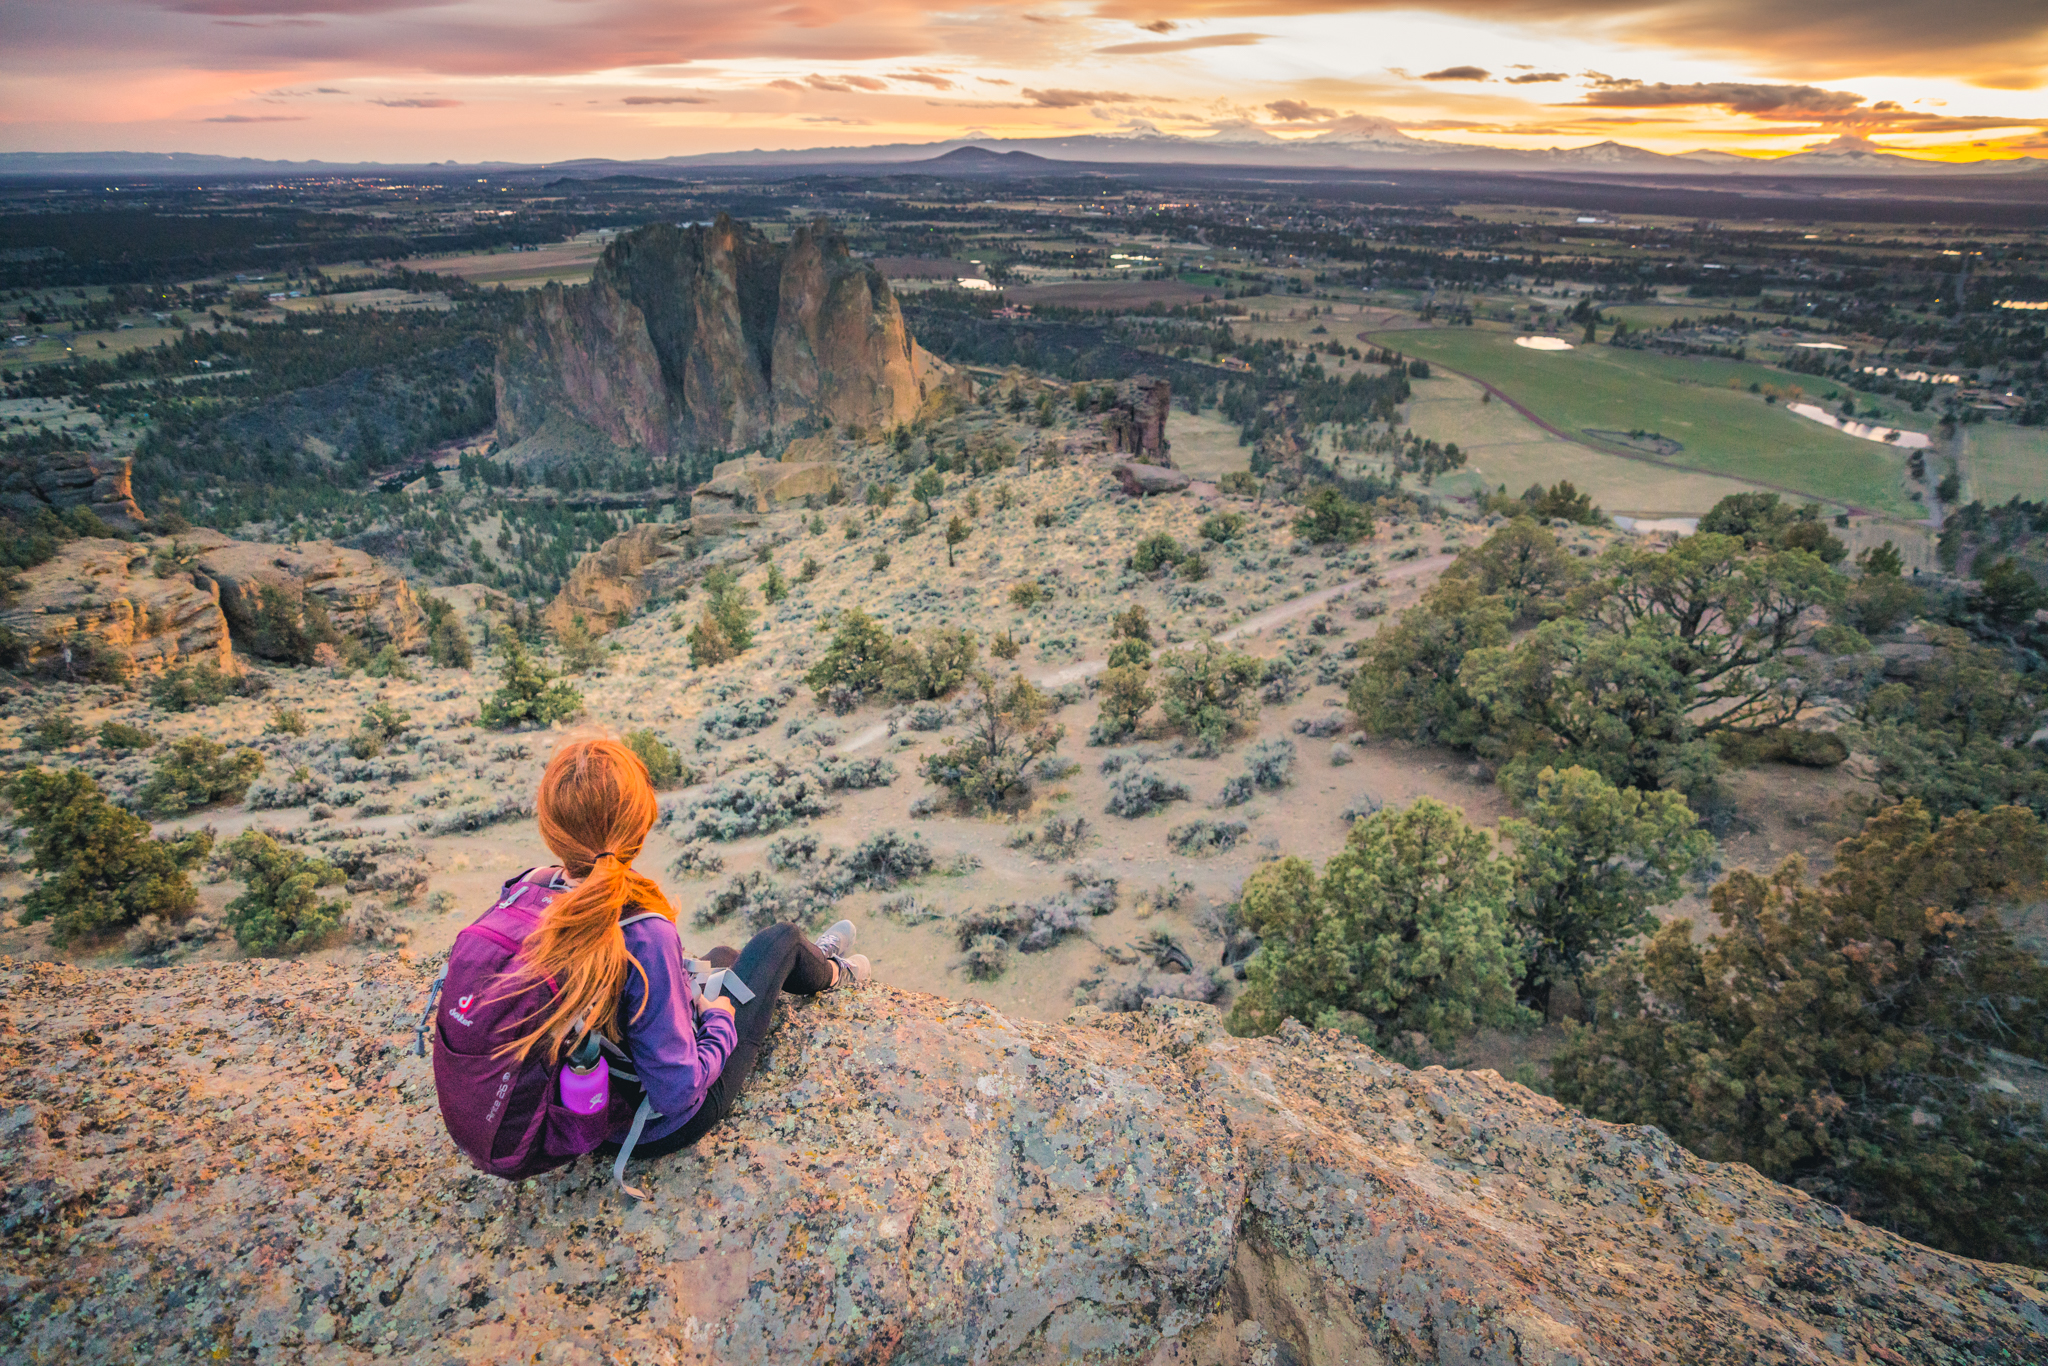 A female hiker sitting at the top of Pilot Butte in Bend and looking out over the landscape of Bend, Oregon